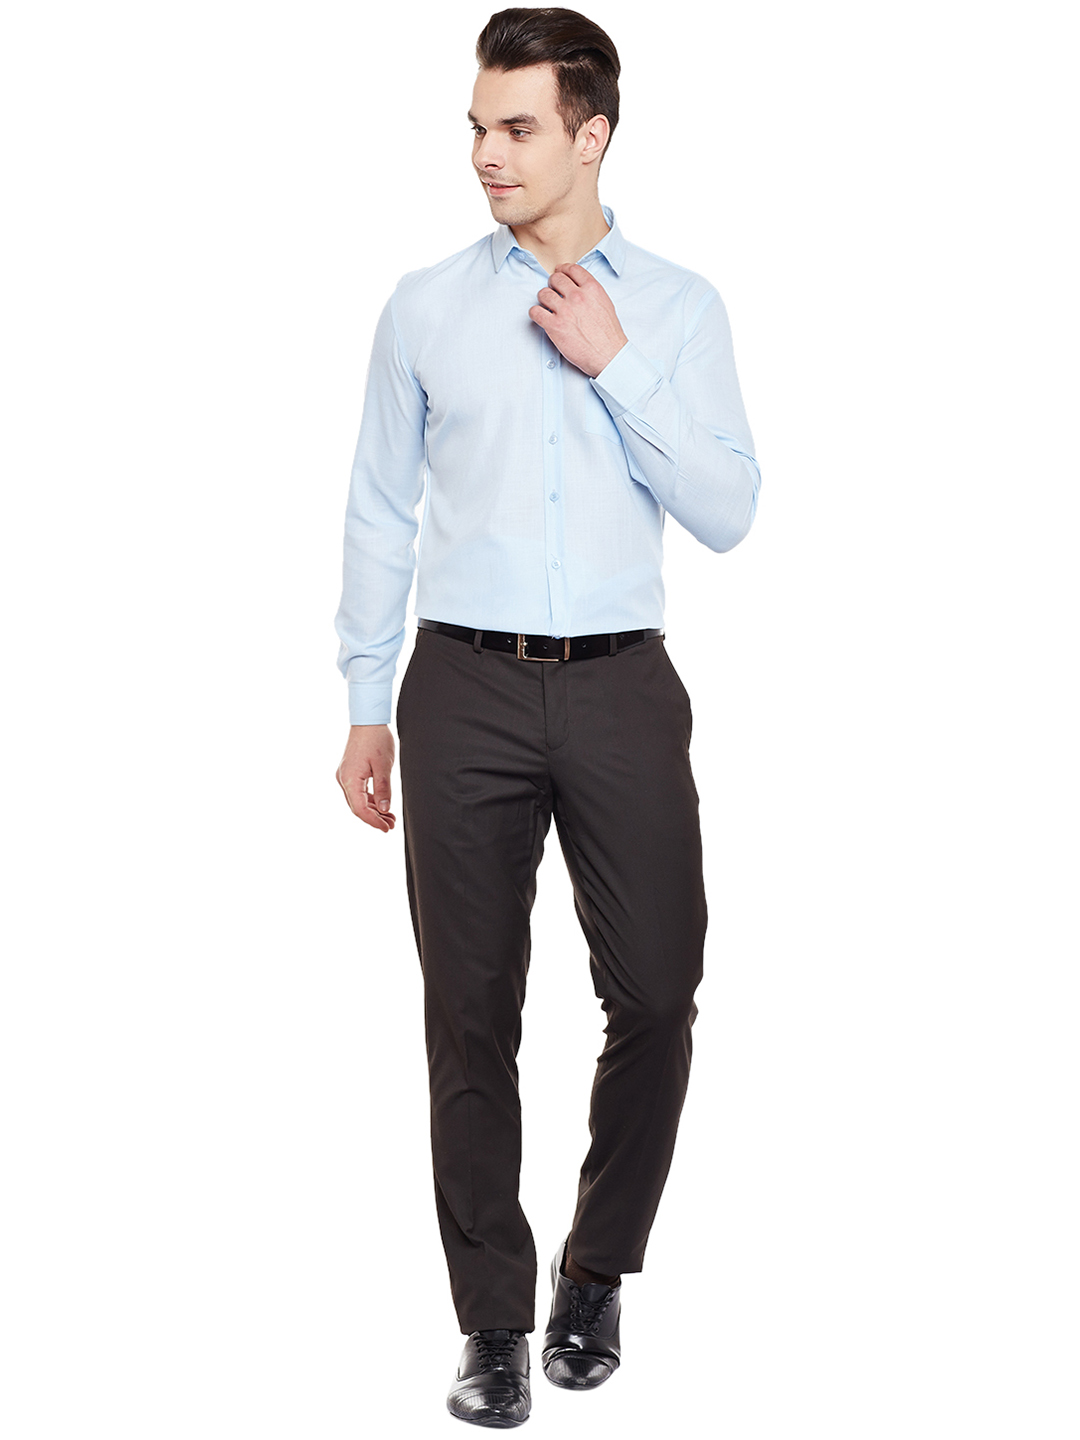 Buy Doora Sky Blue Formal Shirts for Mens Online @ ₹299 from ShopClues